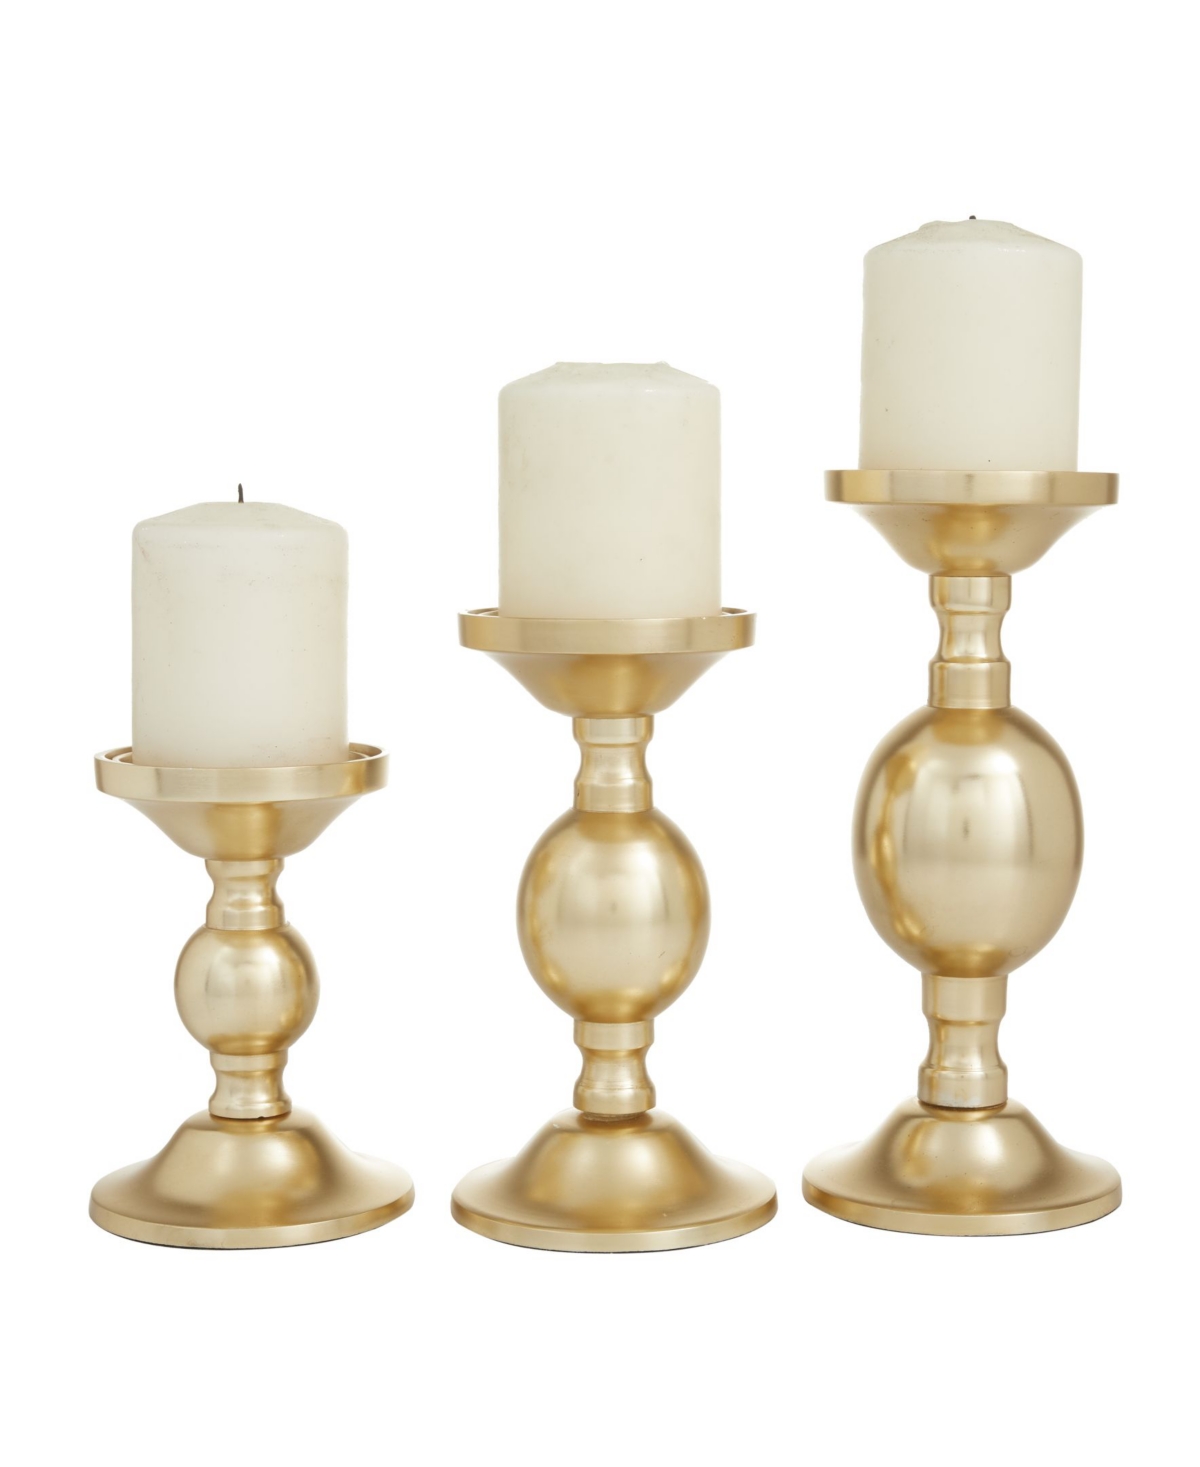 Transitional Candle Holders, Set of 3